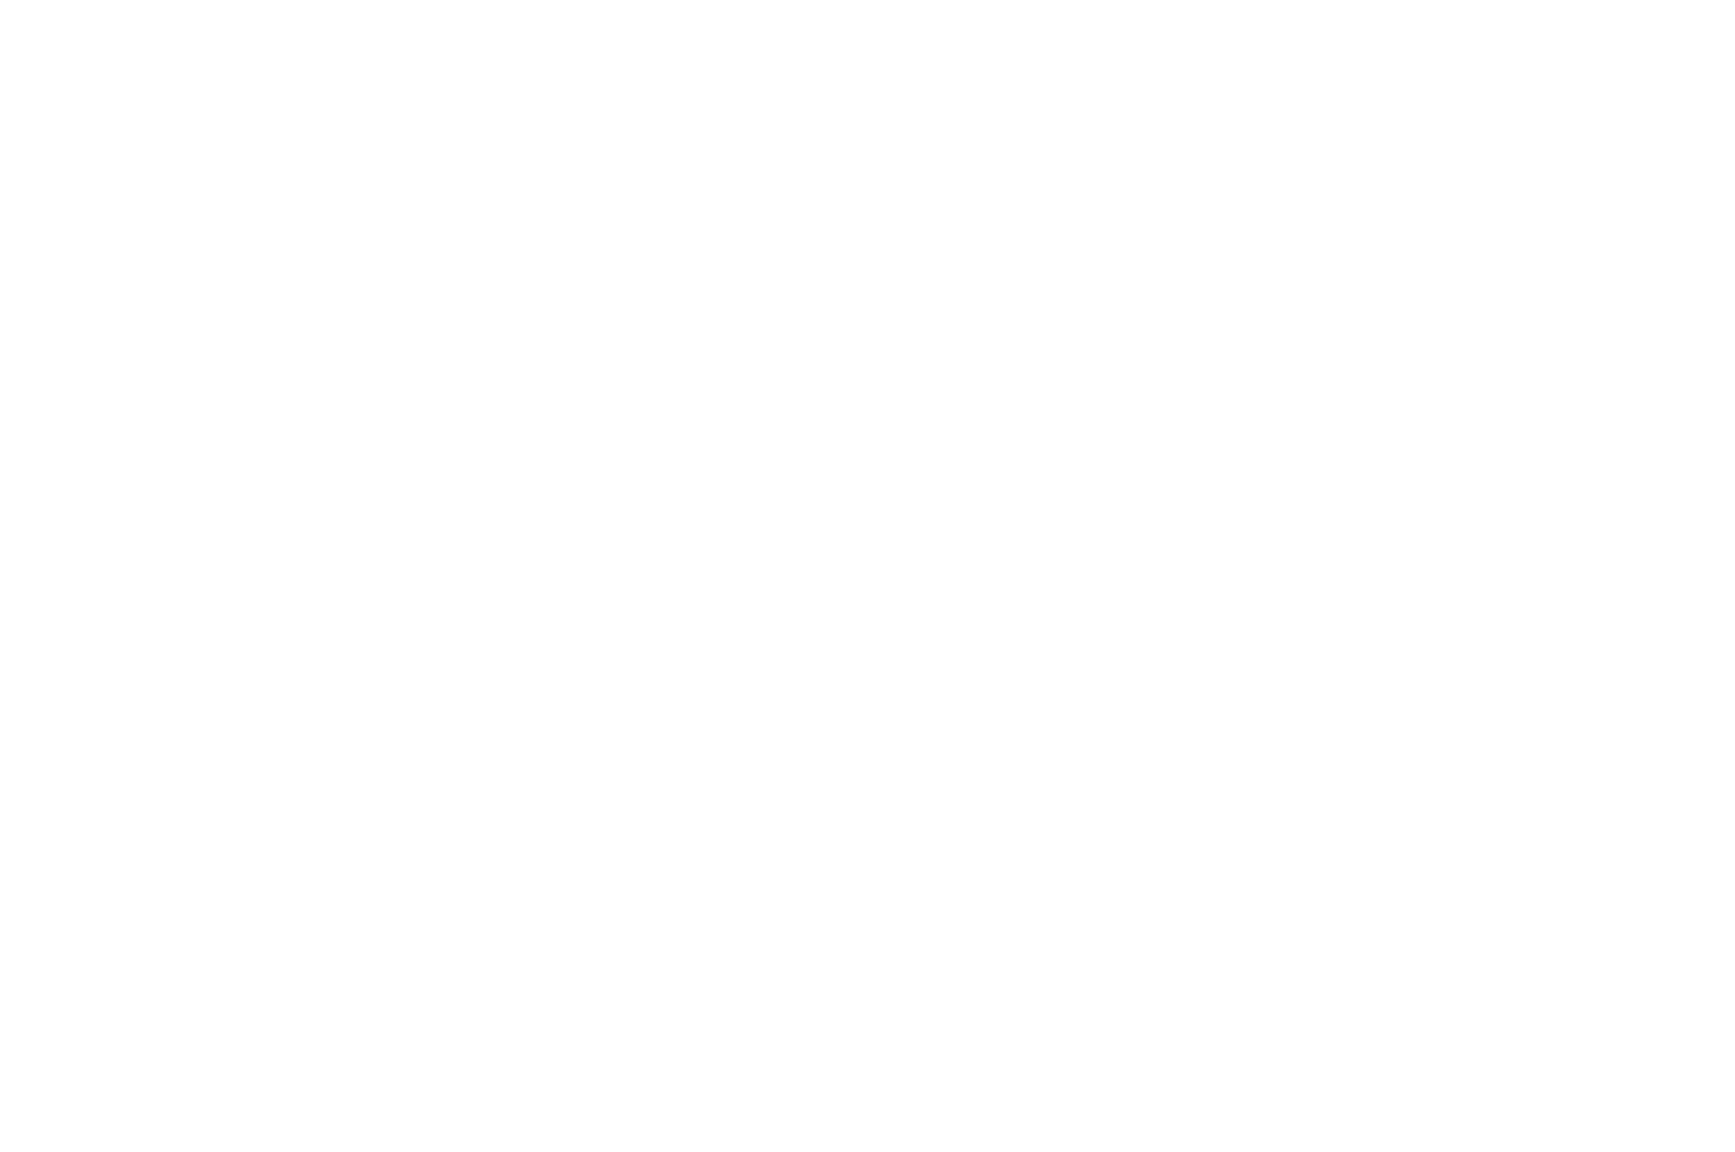 OFFICIAL SELECTION - LA Music Video Awards - 2019(1).png